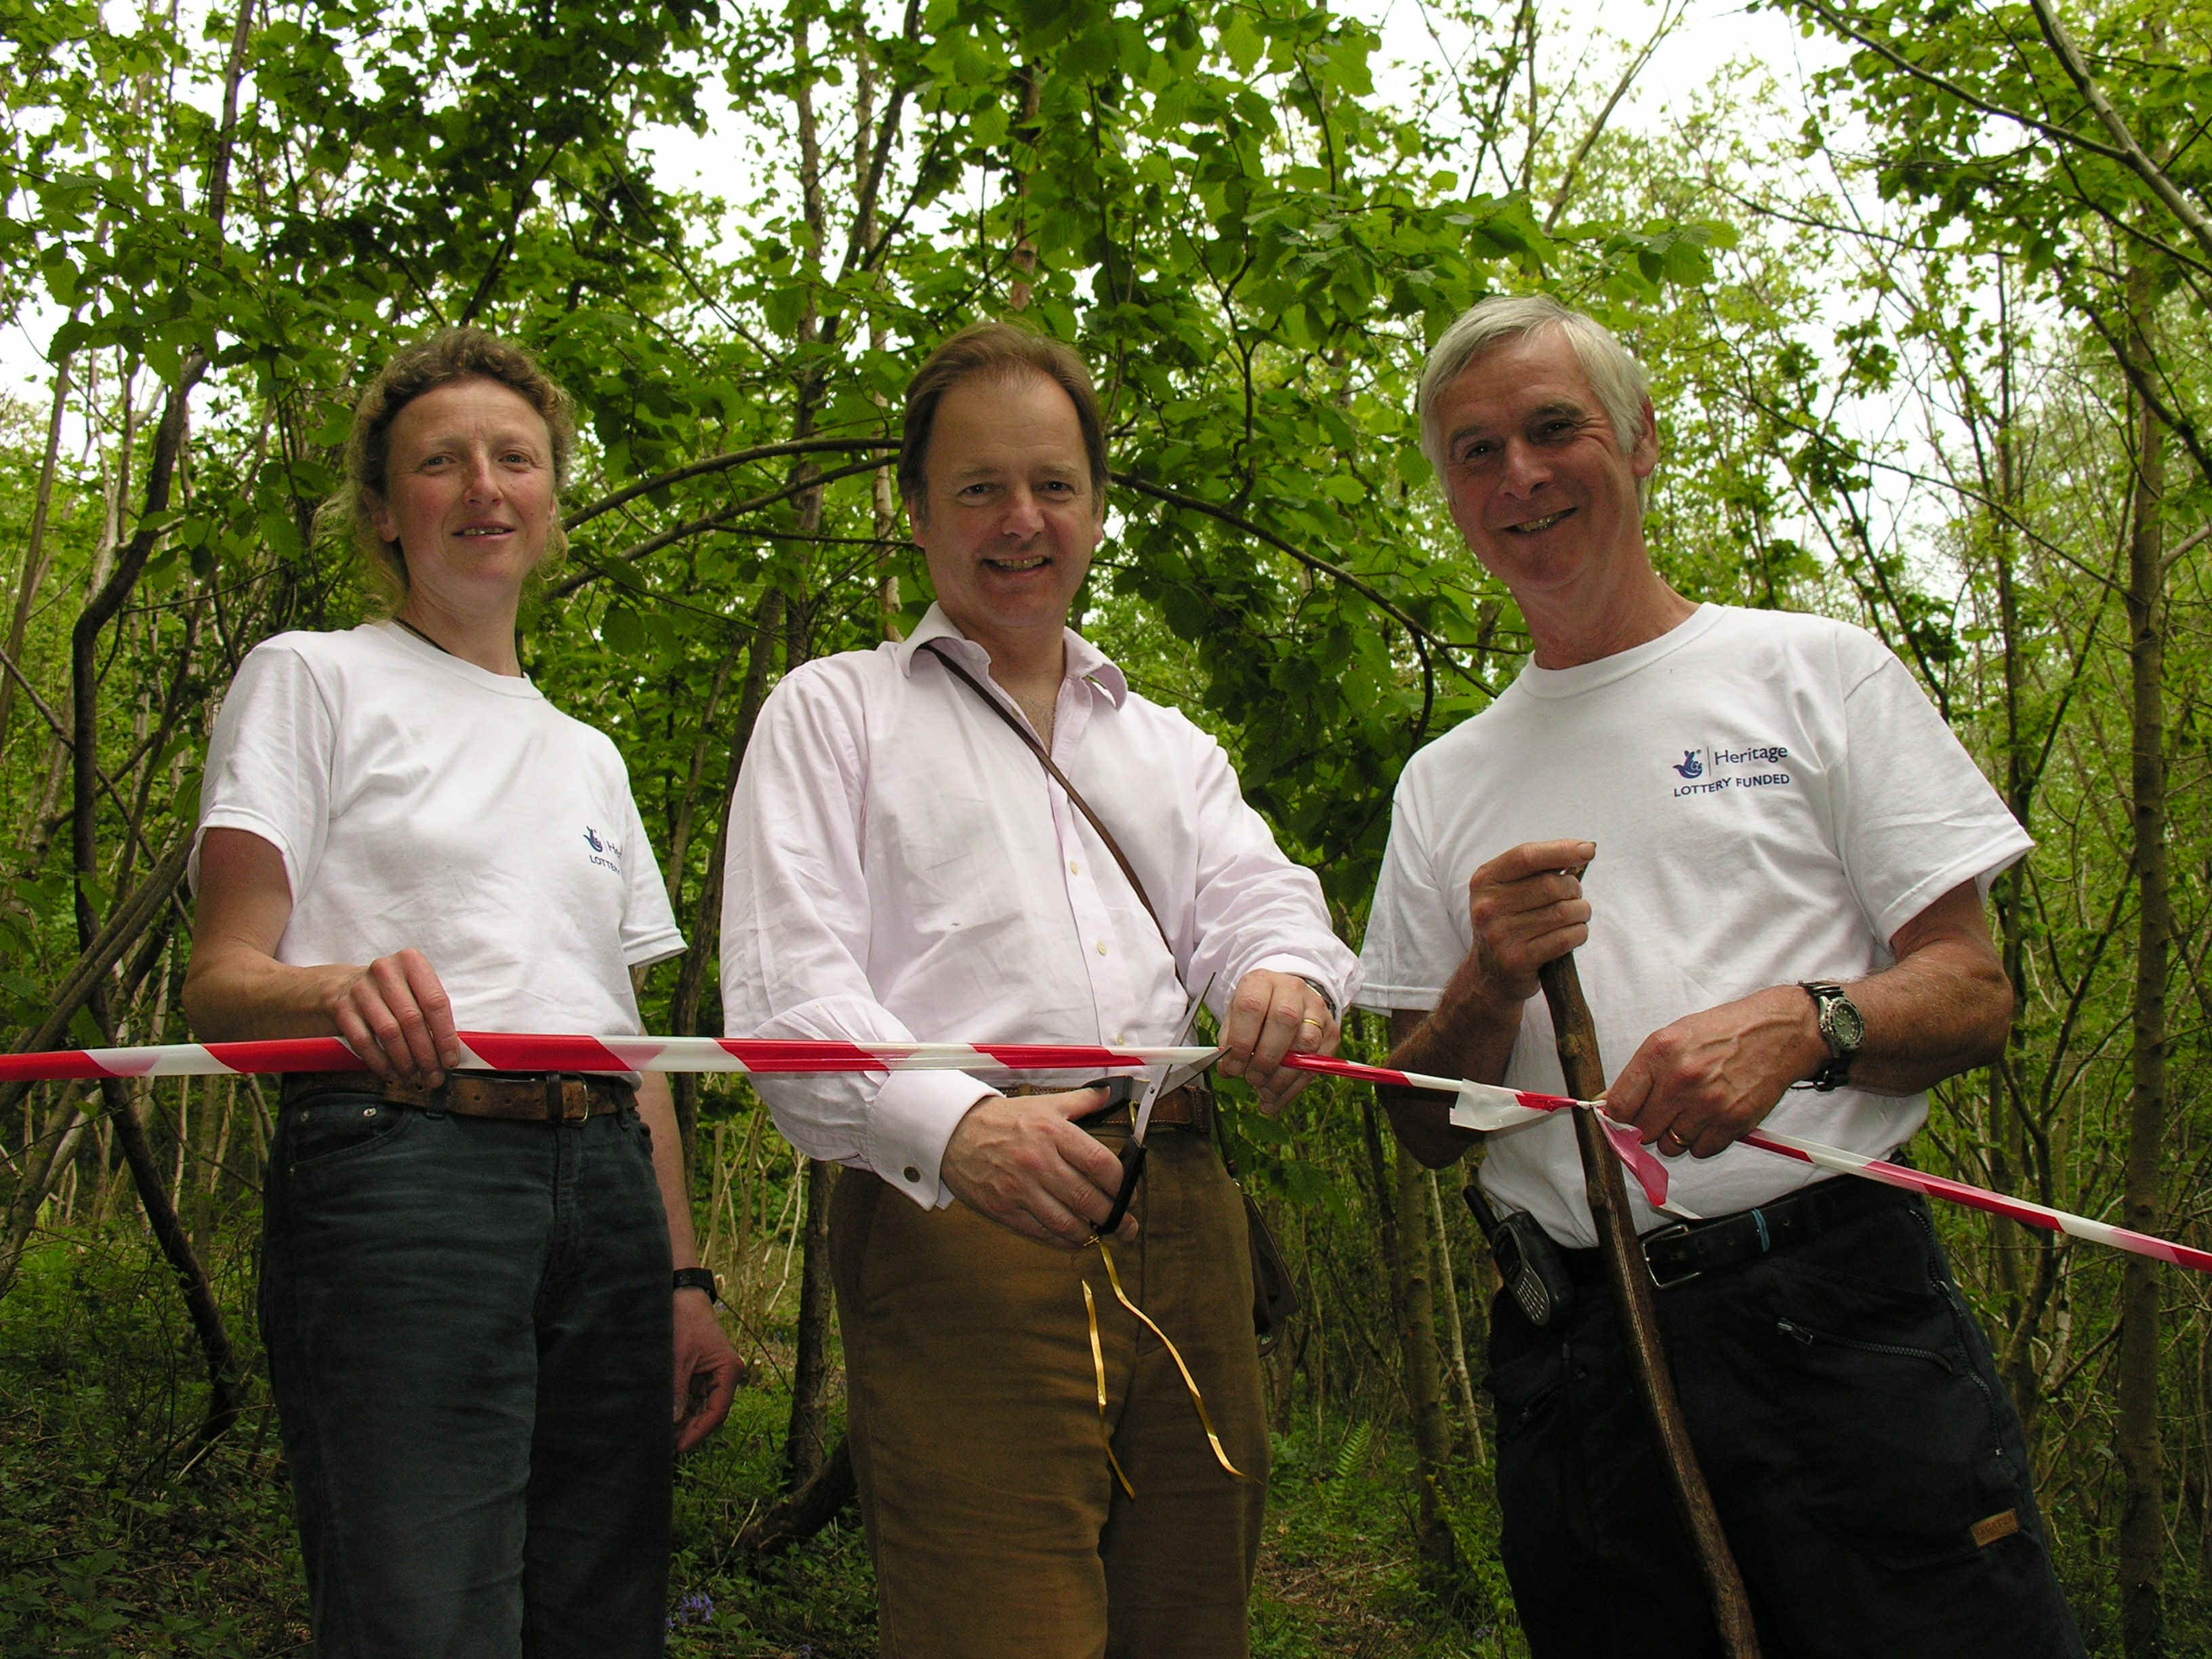 Opening of Dormouse Trail 10.5.08.bmp (23970870 bytes)